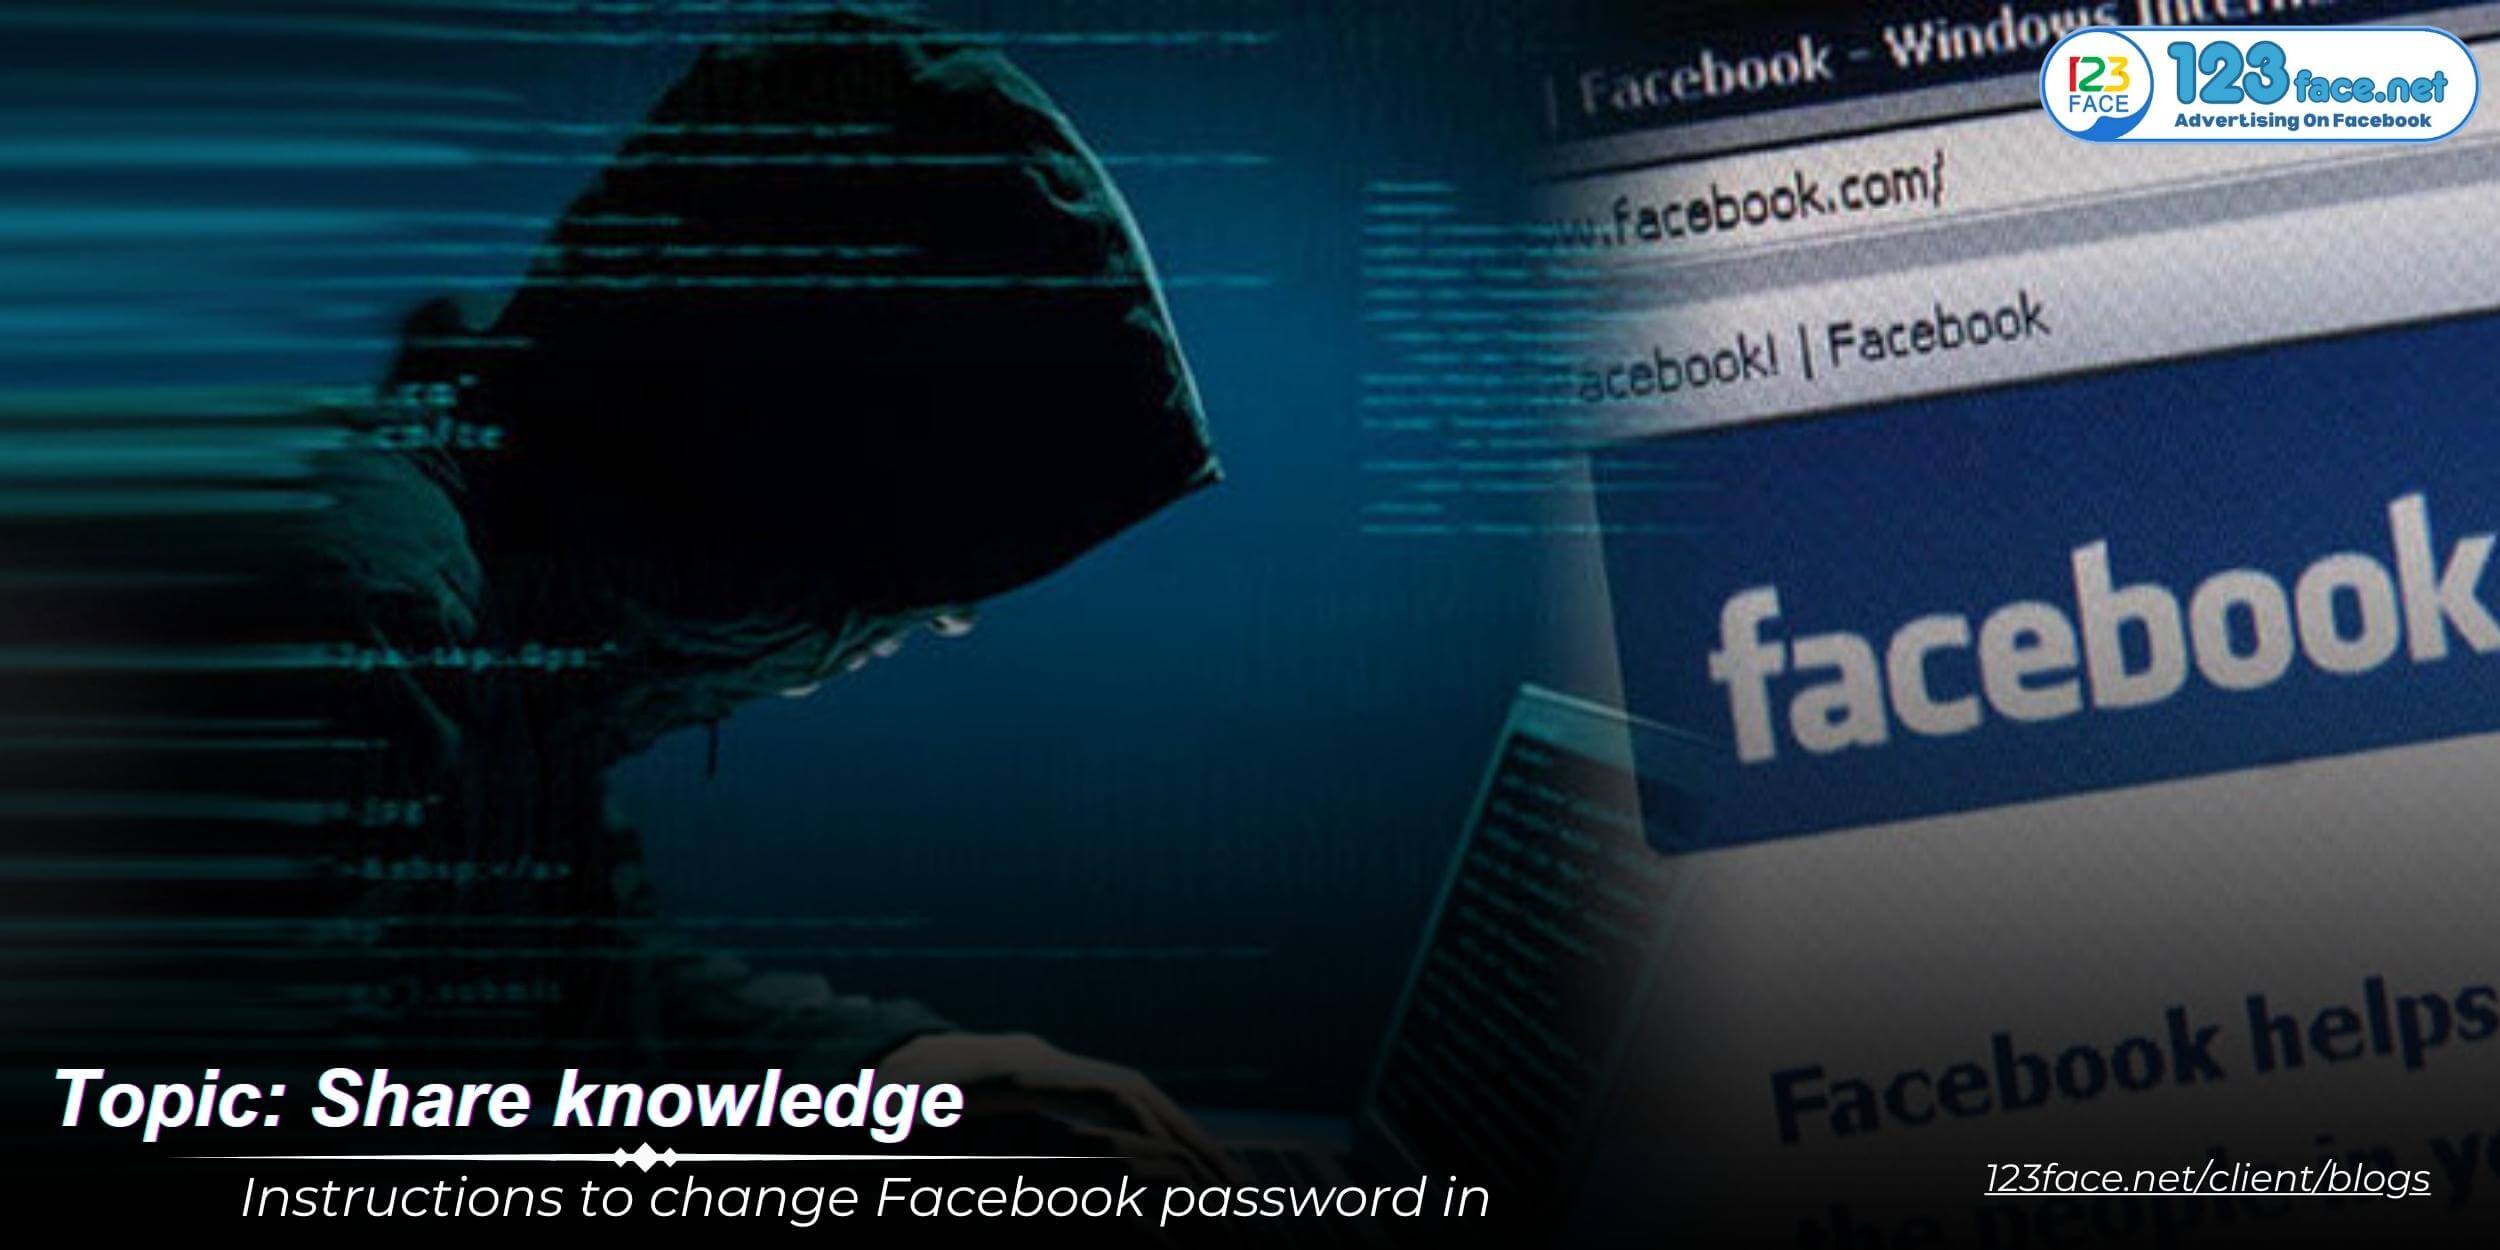 Instructions to change Facebook password in many ways